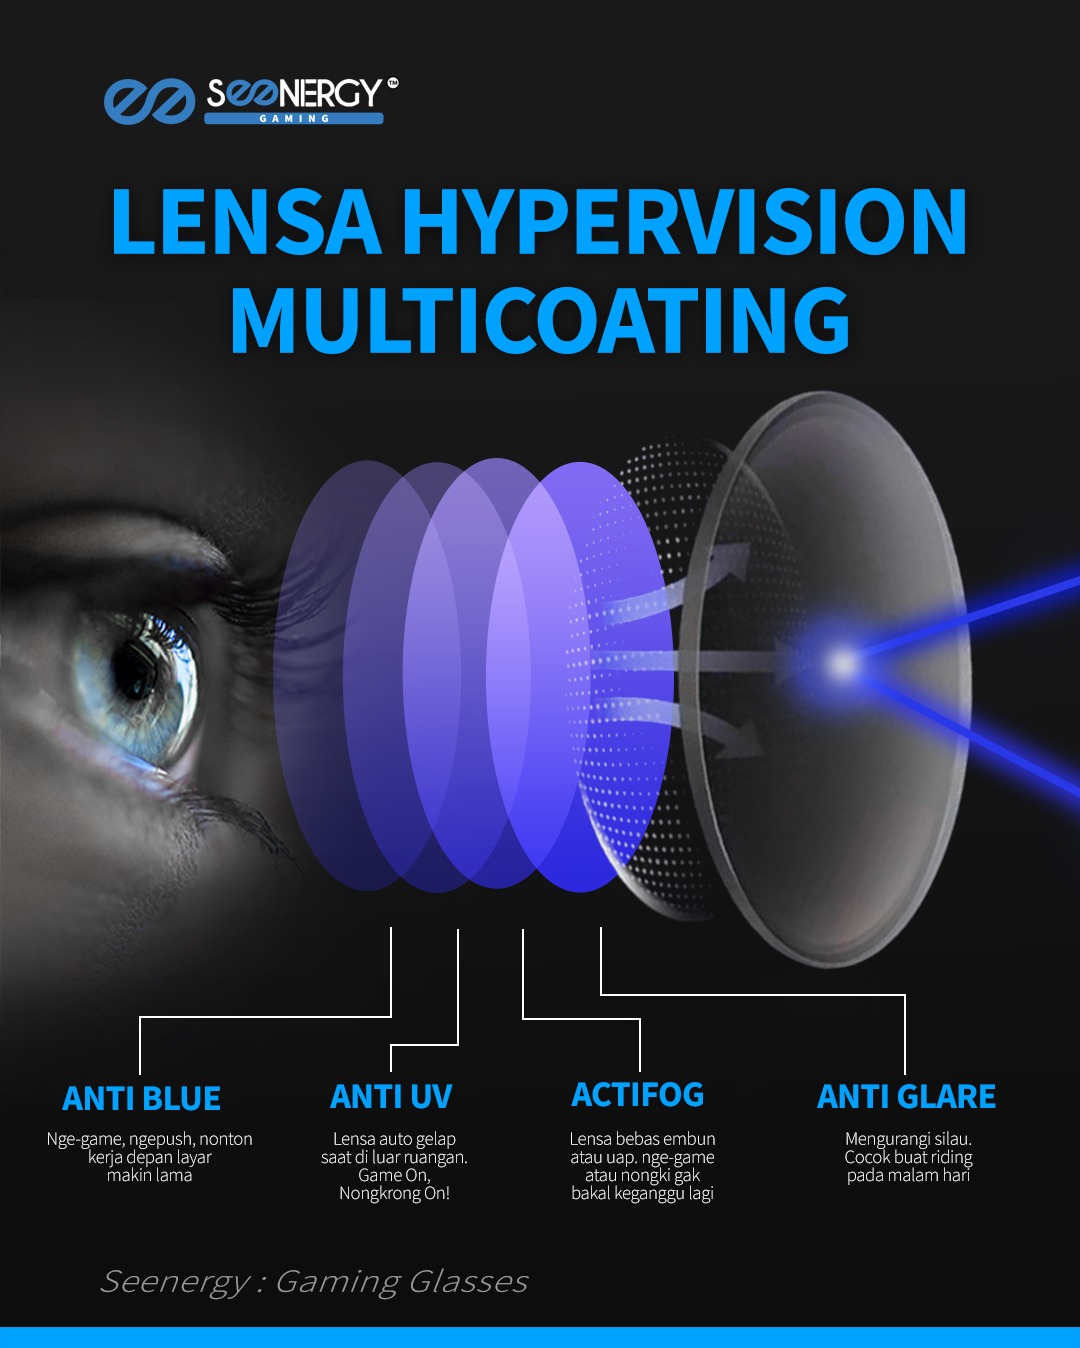 Hypervision Pro Lens Features